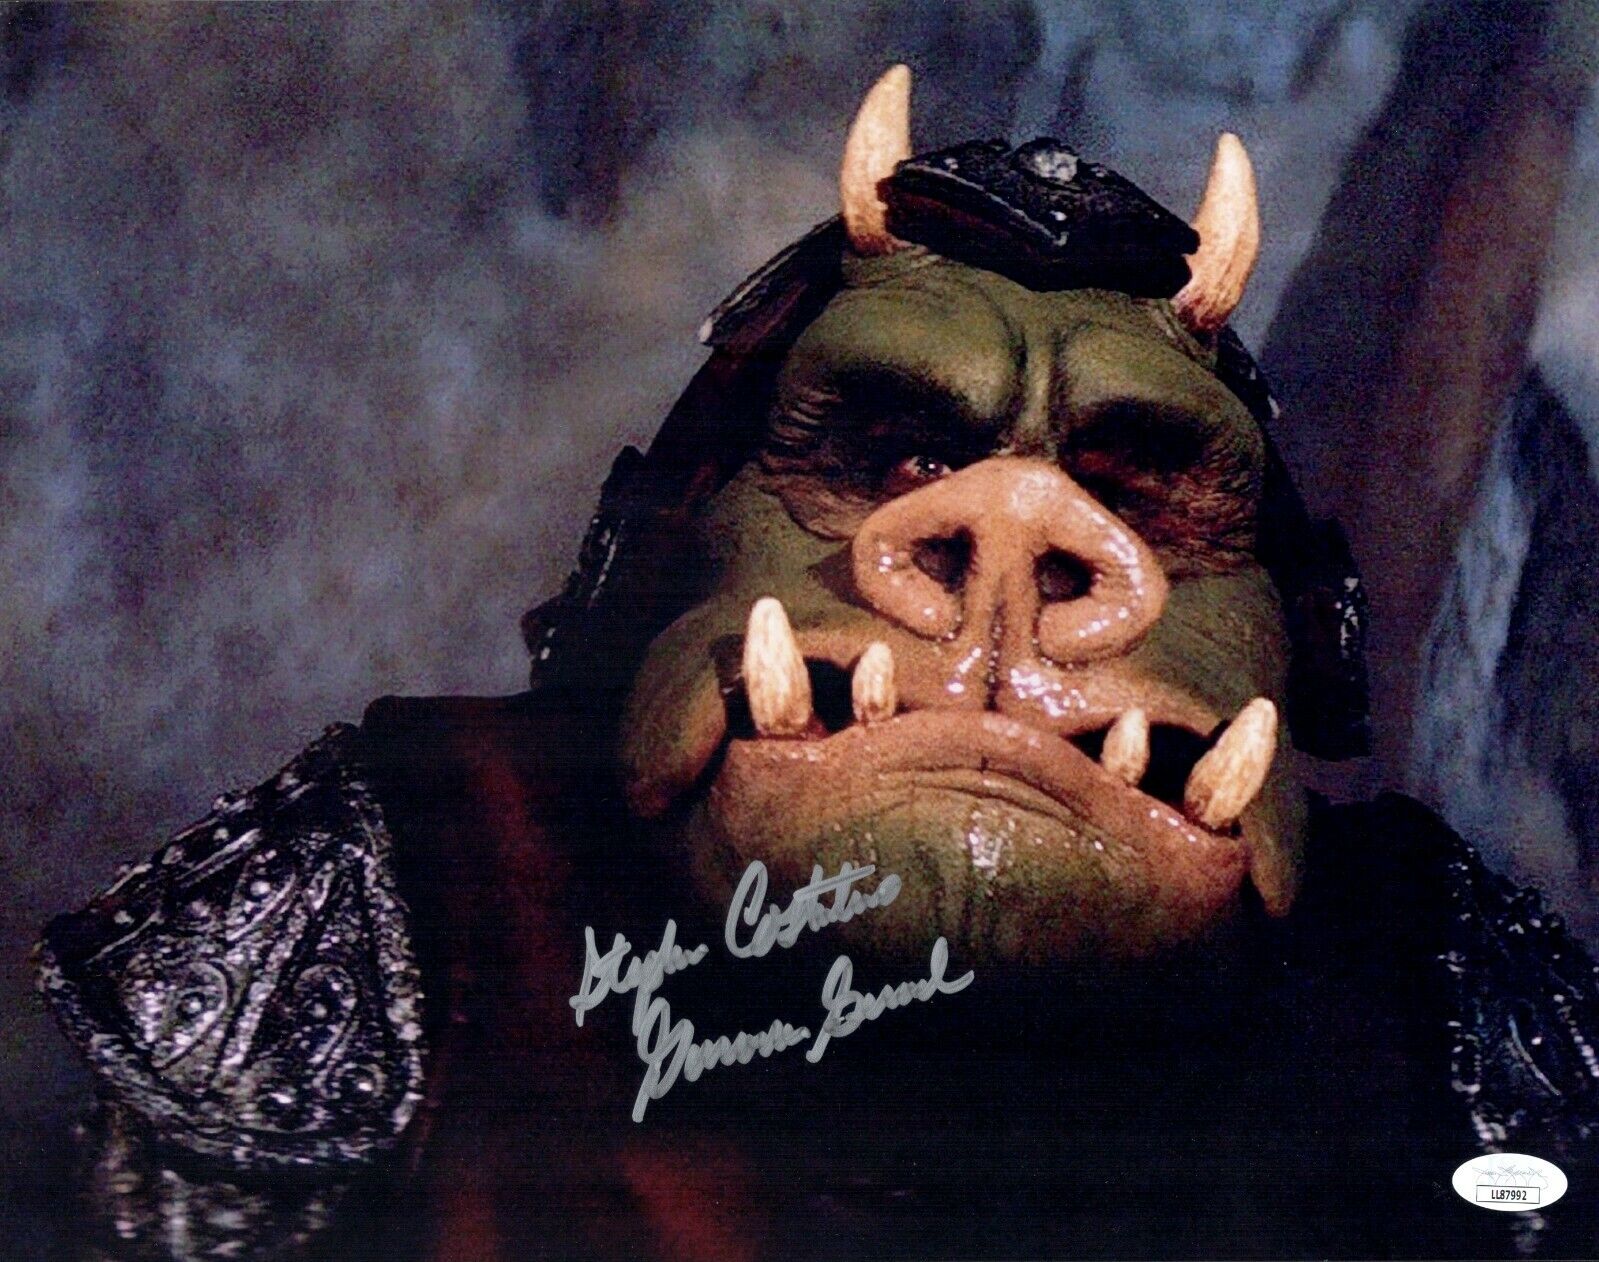 STEPHEN COSTANTINO Signed RETURN OF THE JEDI 11x14 Photo Poster painting Autograph JSA COA Cert